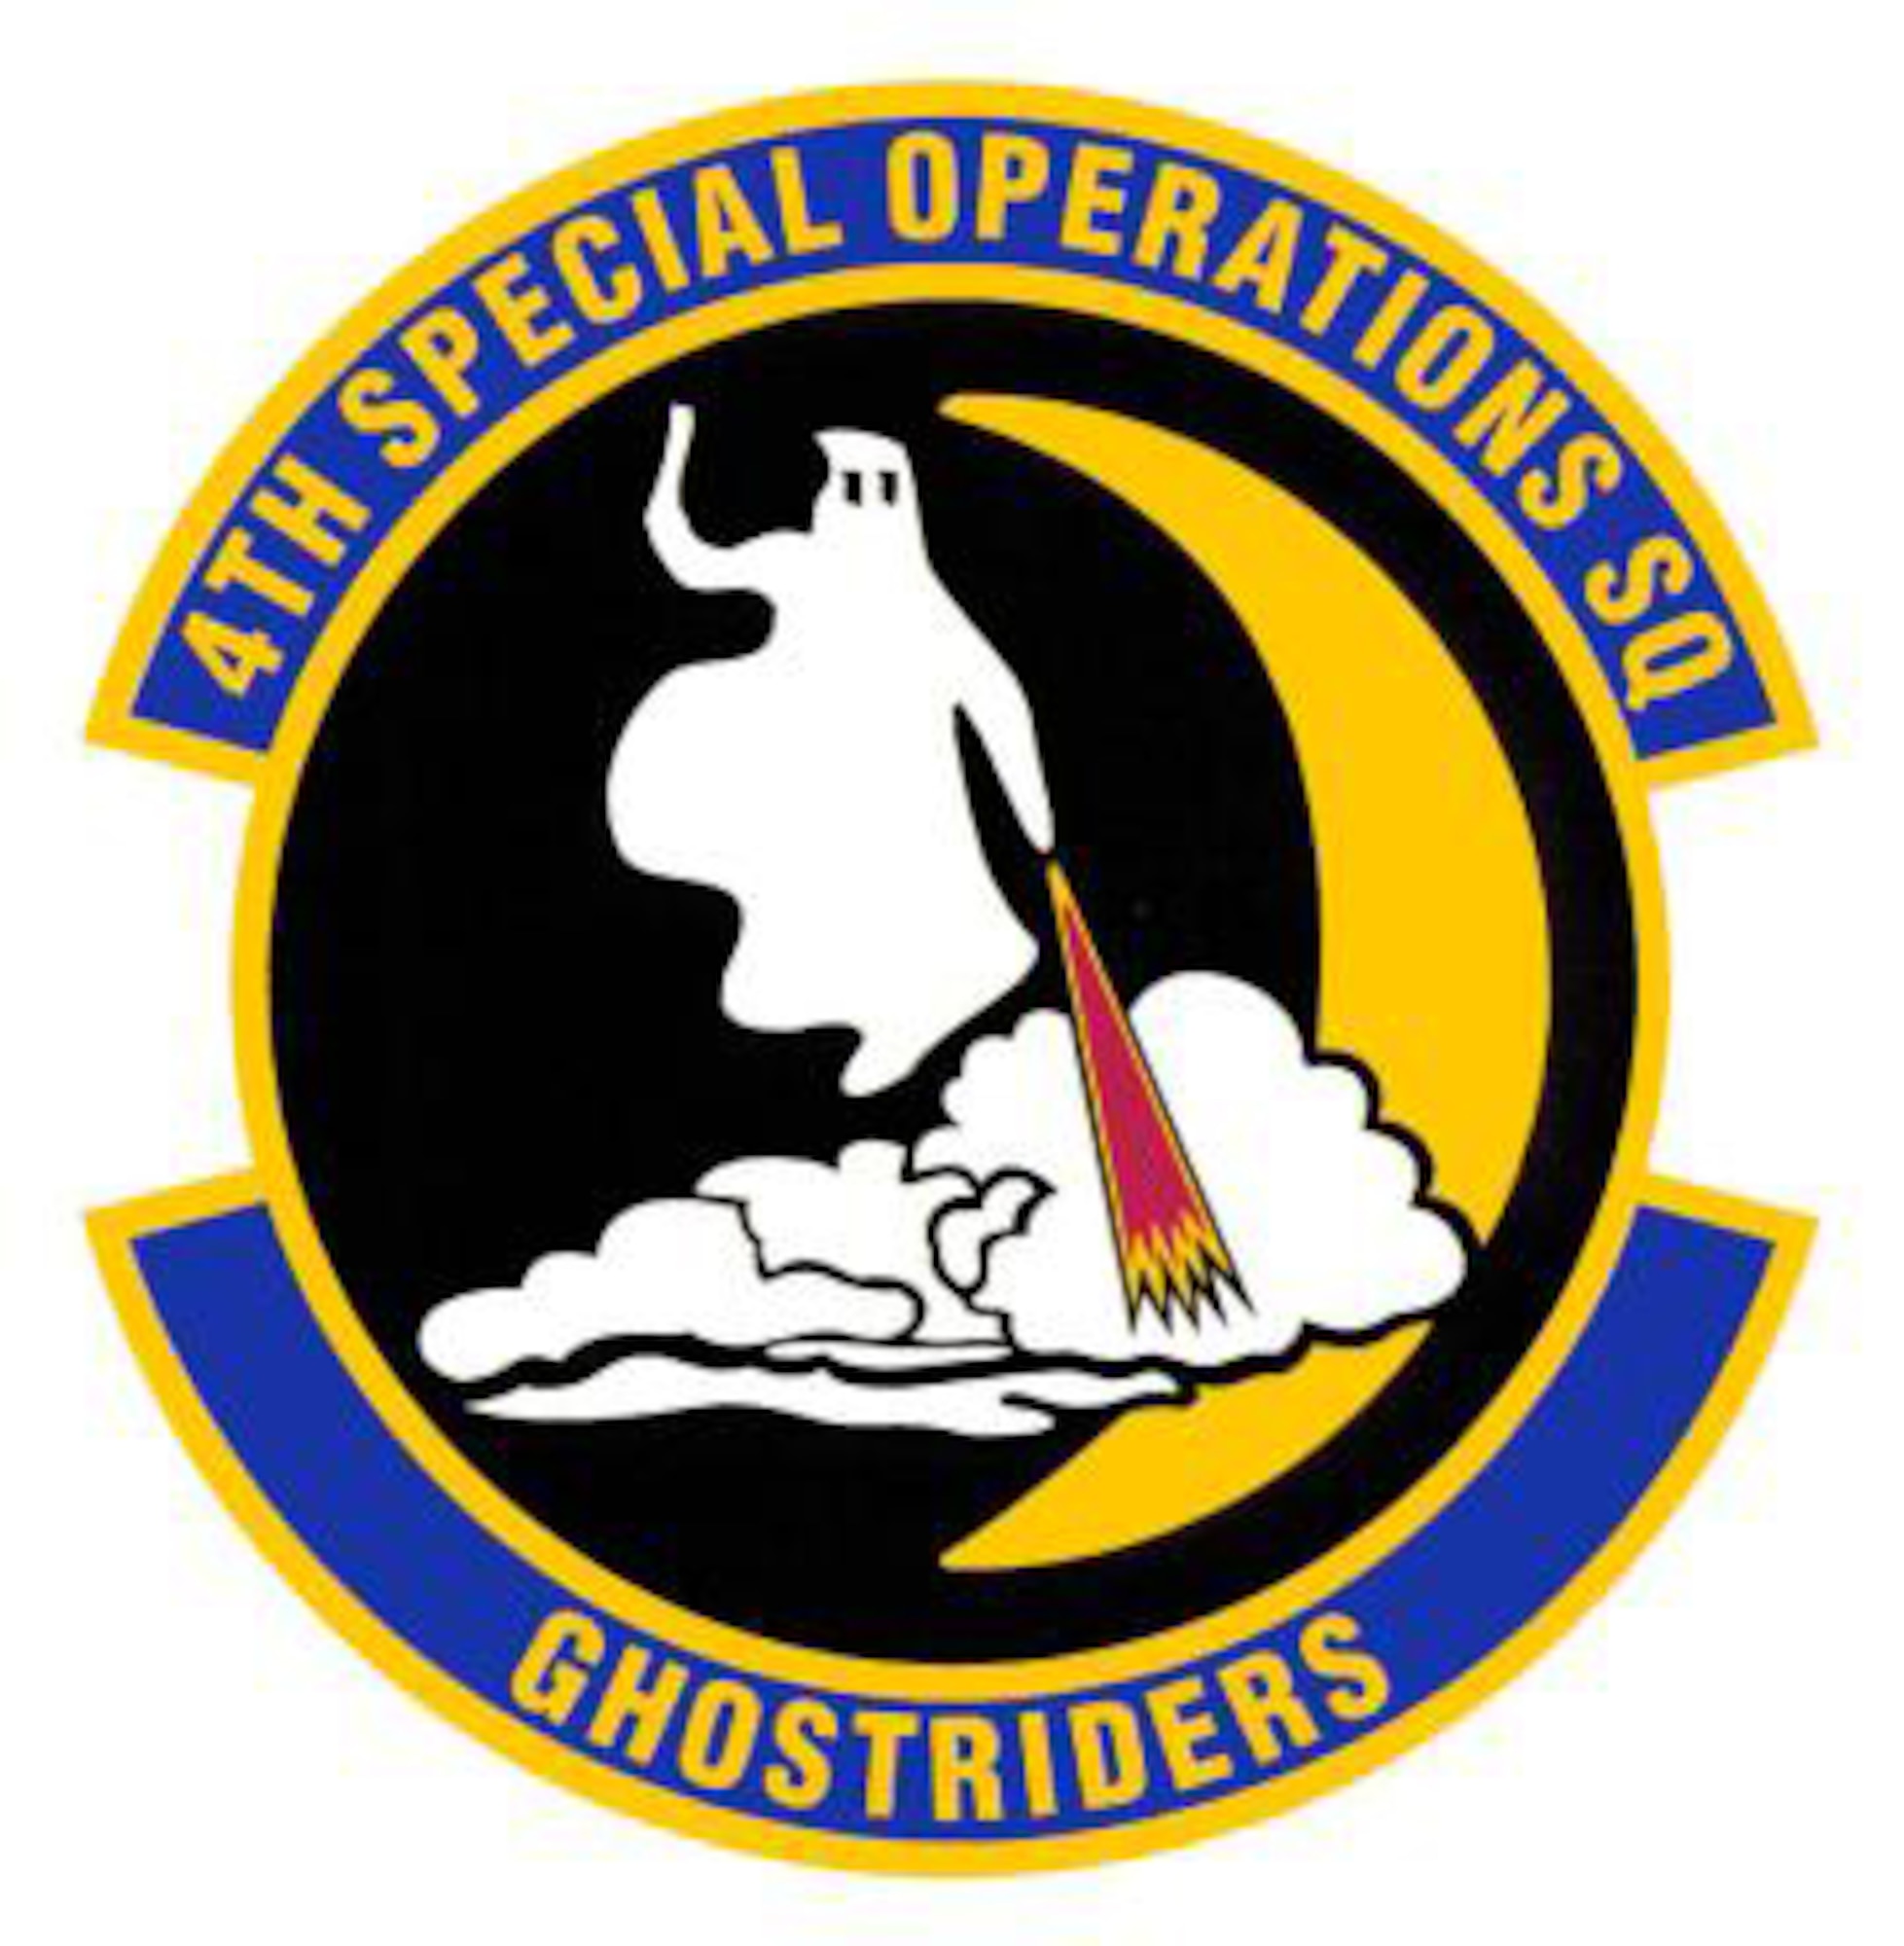 4th SOS Emblem Significance: Blue background represents the sky, the primary theater of Air Force operations. Yellow refers to the sun and the excellence required of Air Force personnel. The black disc with crescent suggests a night sky in which the unit is especially adapted to operate. The ghost specter reflects the unit's history and the aircraft named "Spooky." It further alludes to the squadron's ability to appear and disappear. The flames spewing from the ghost's arm denotes the firepower of the unit's aircraft from high altitude. (The ghost represented on the unit emblem was originally portrayed on nose art on the first gunship (AC-47). The AC-47 was universally called "Spooky" and inclusion of the "Spooky" ghost on the patch ties the AC-130U gunship to its original ancestor.)
